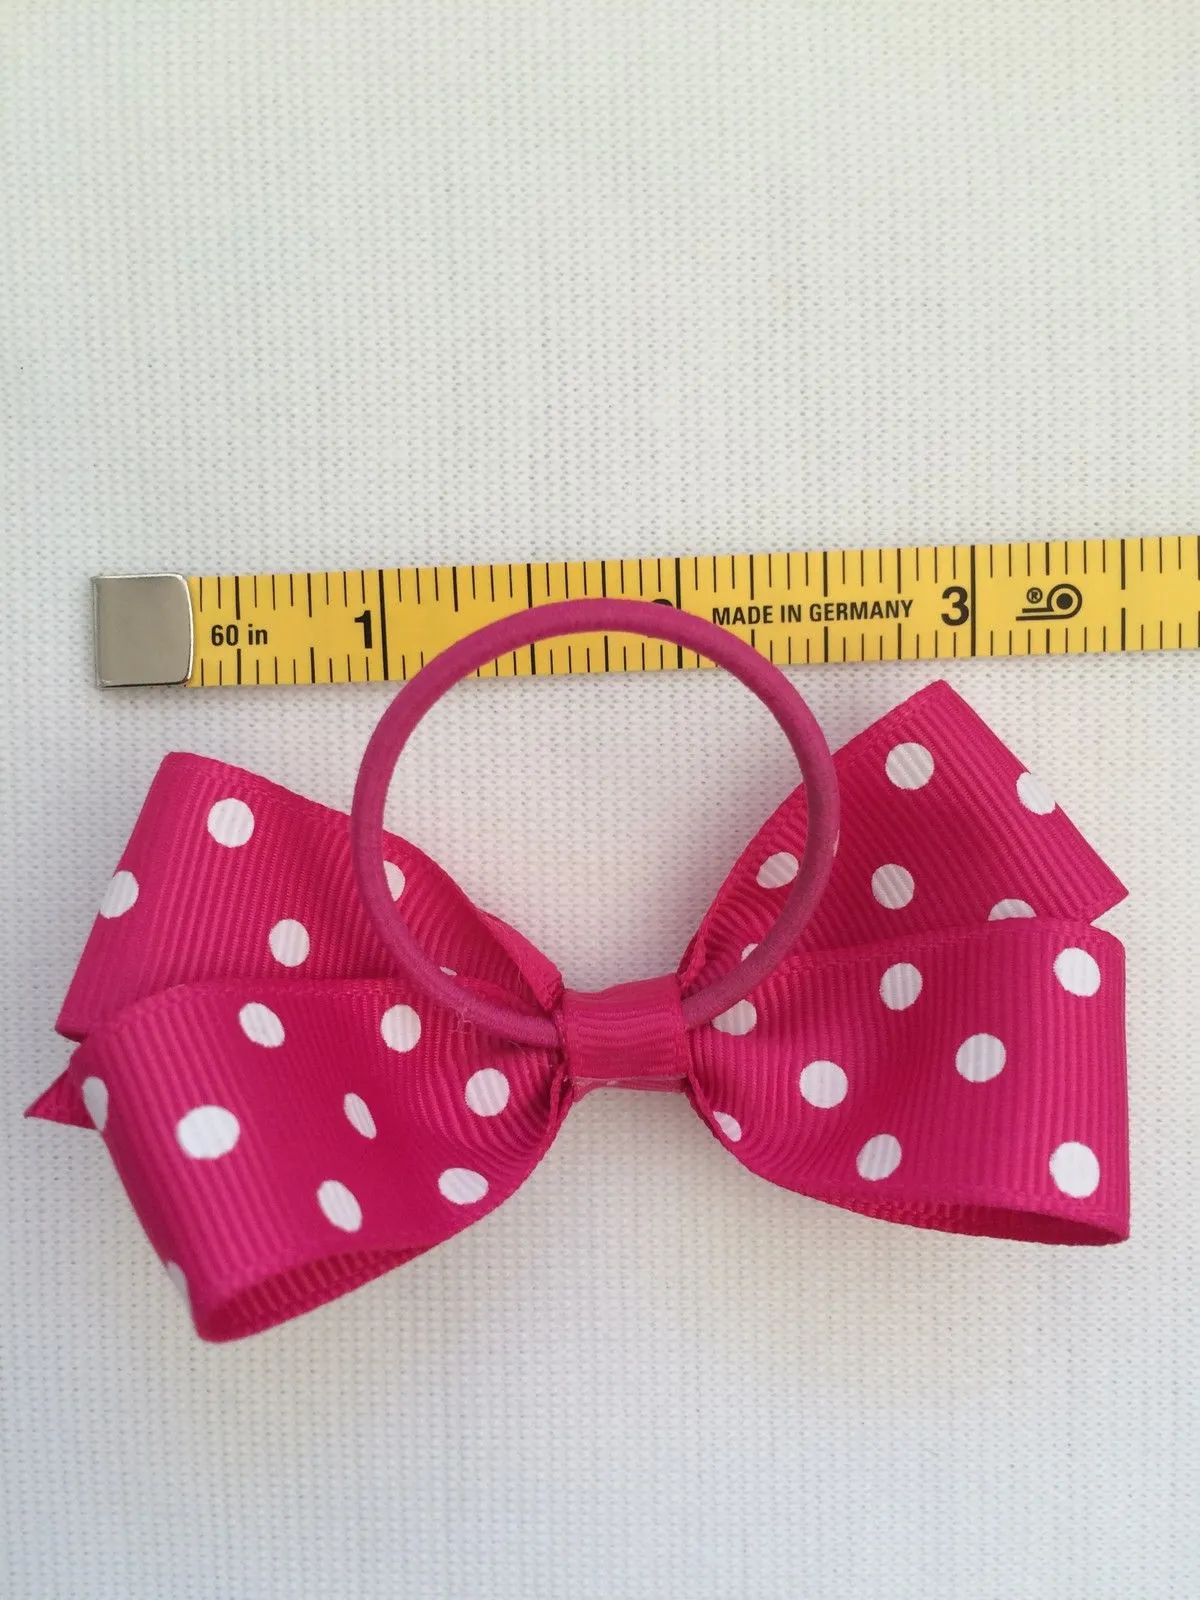 10% OFF 2015 Wholesale 3 INCH,MINI GROSGRAIN RIBBON Alice Band Boutique DOT BOW WITH ELASTIC HAIR BAND Hair accessories..